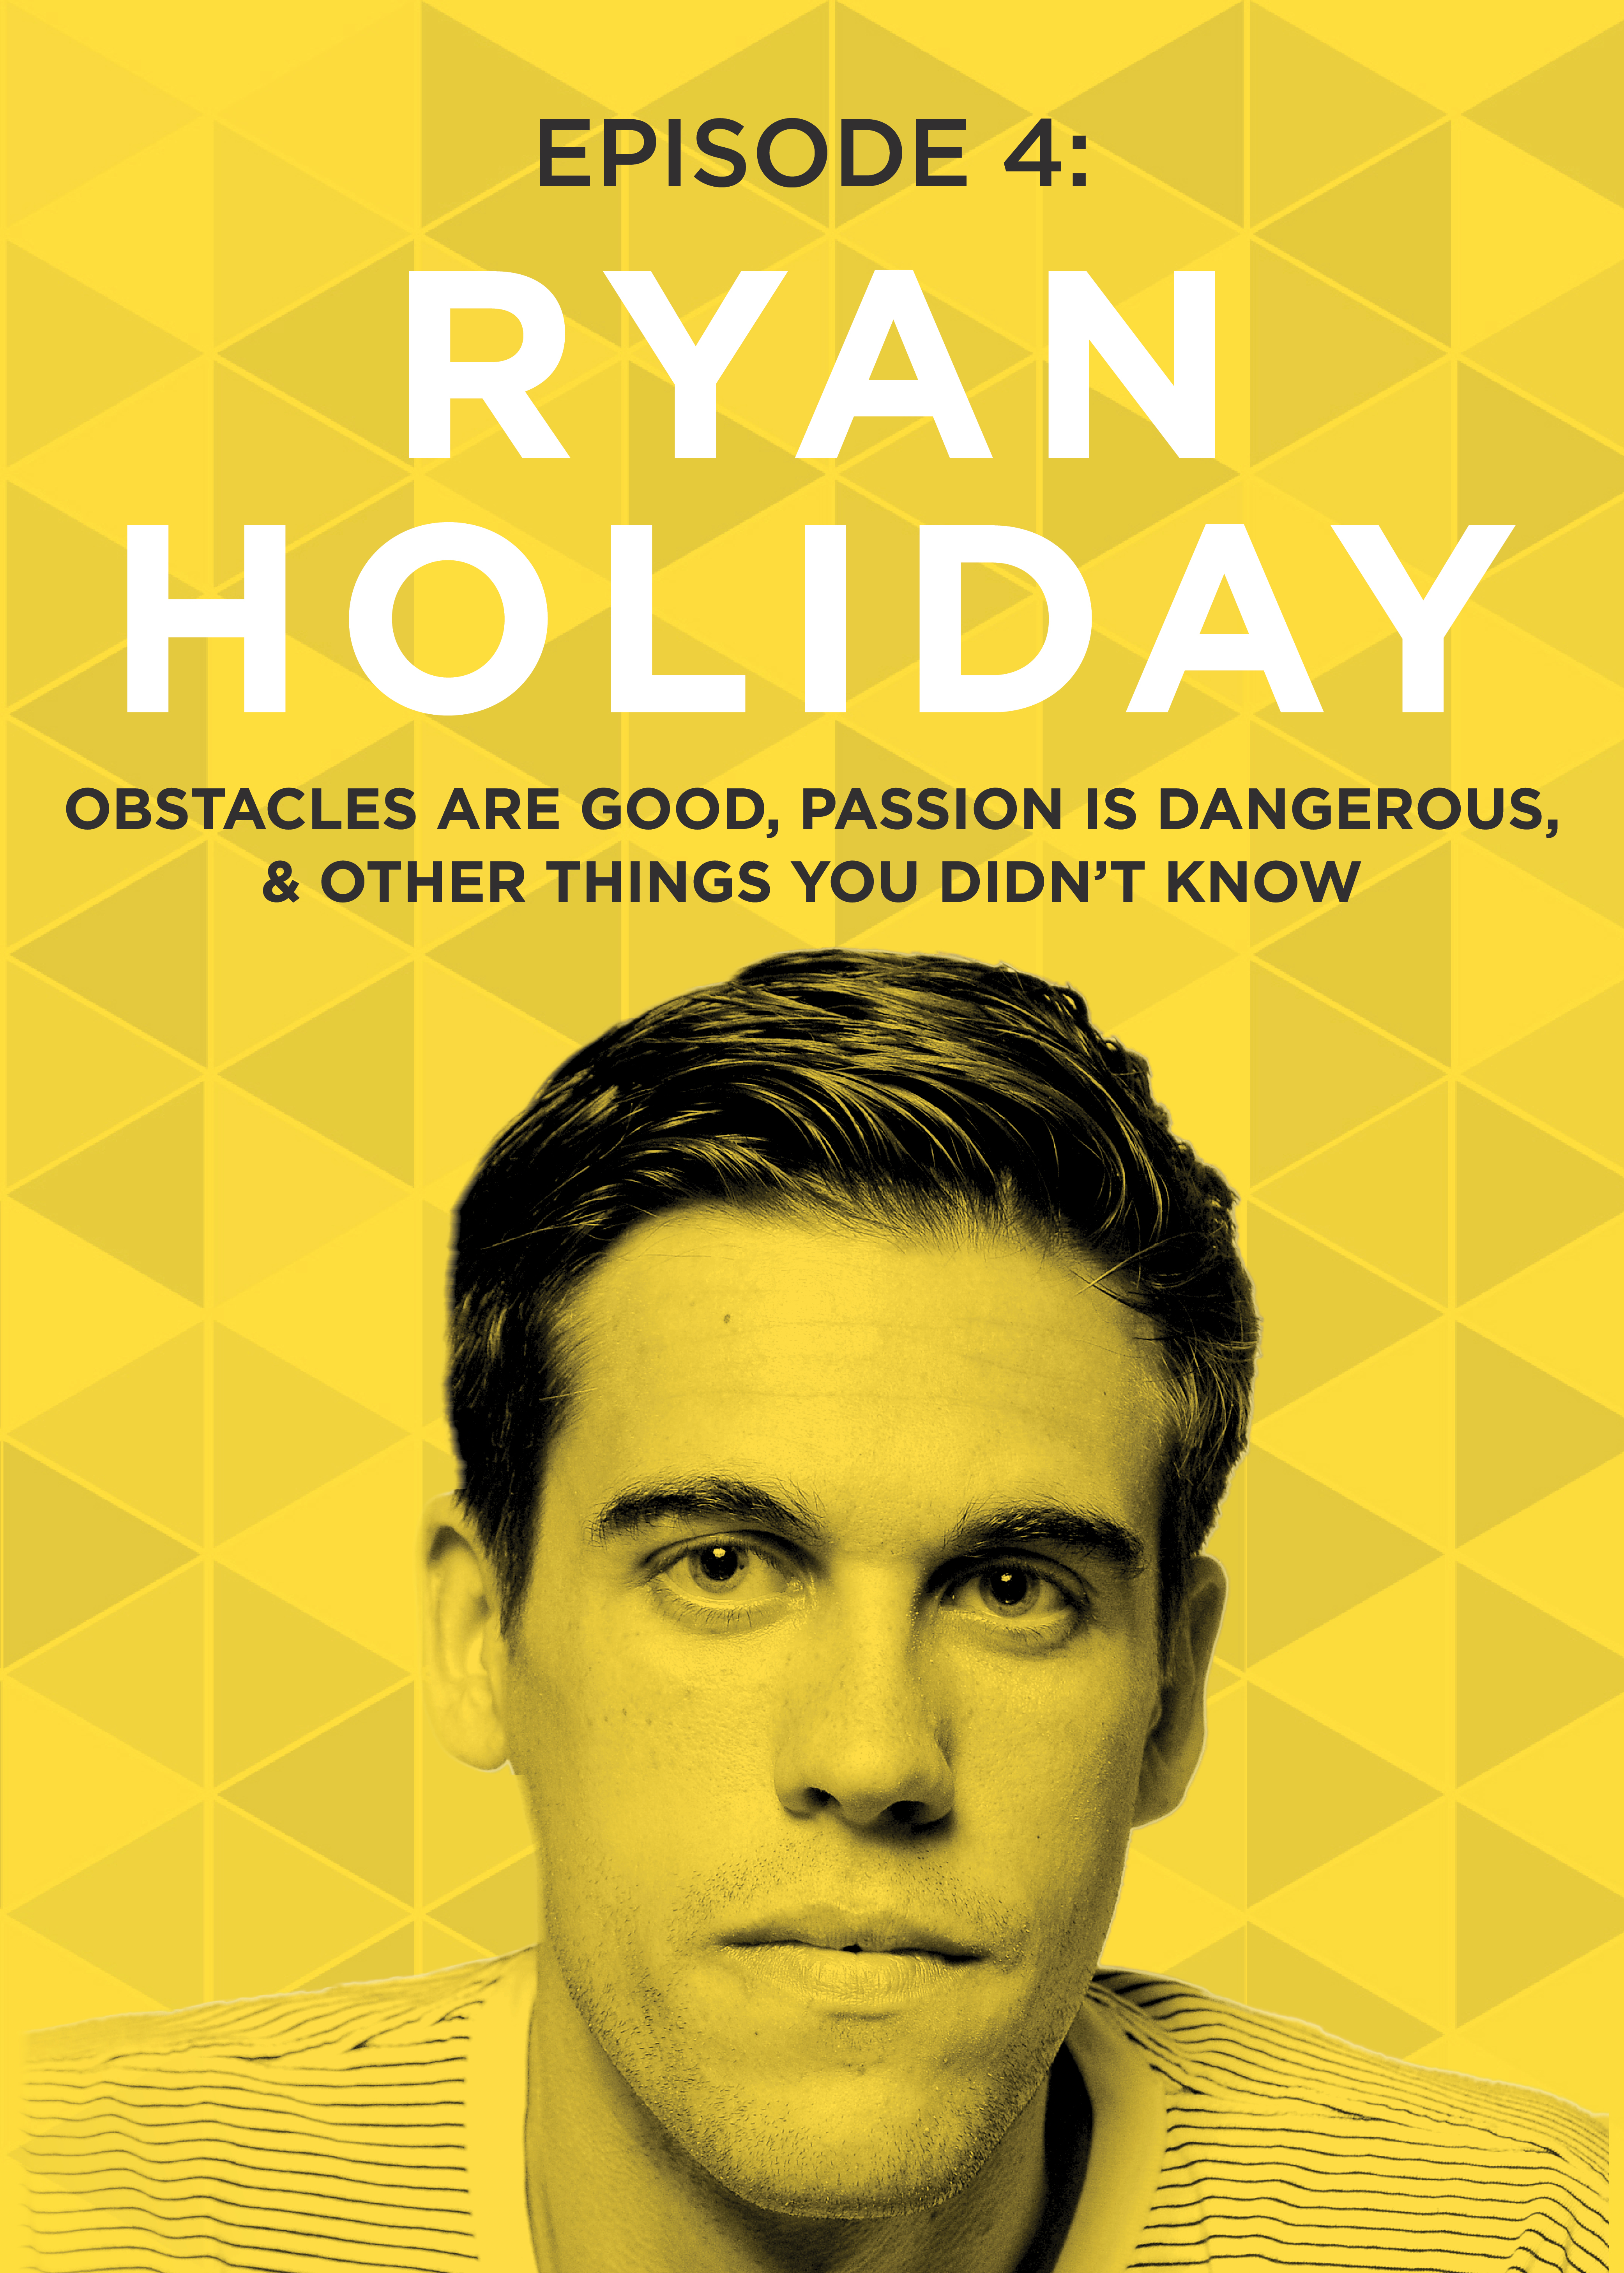 EP 4: Obstacles Are Good, Passion Is Dangerous, & Other Things You Didn’t Know with Ryan Holiday